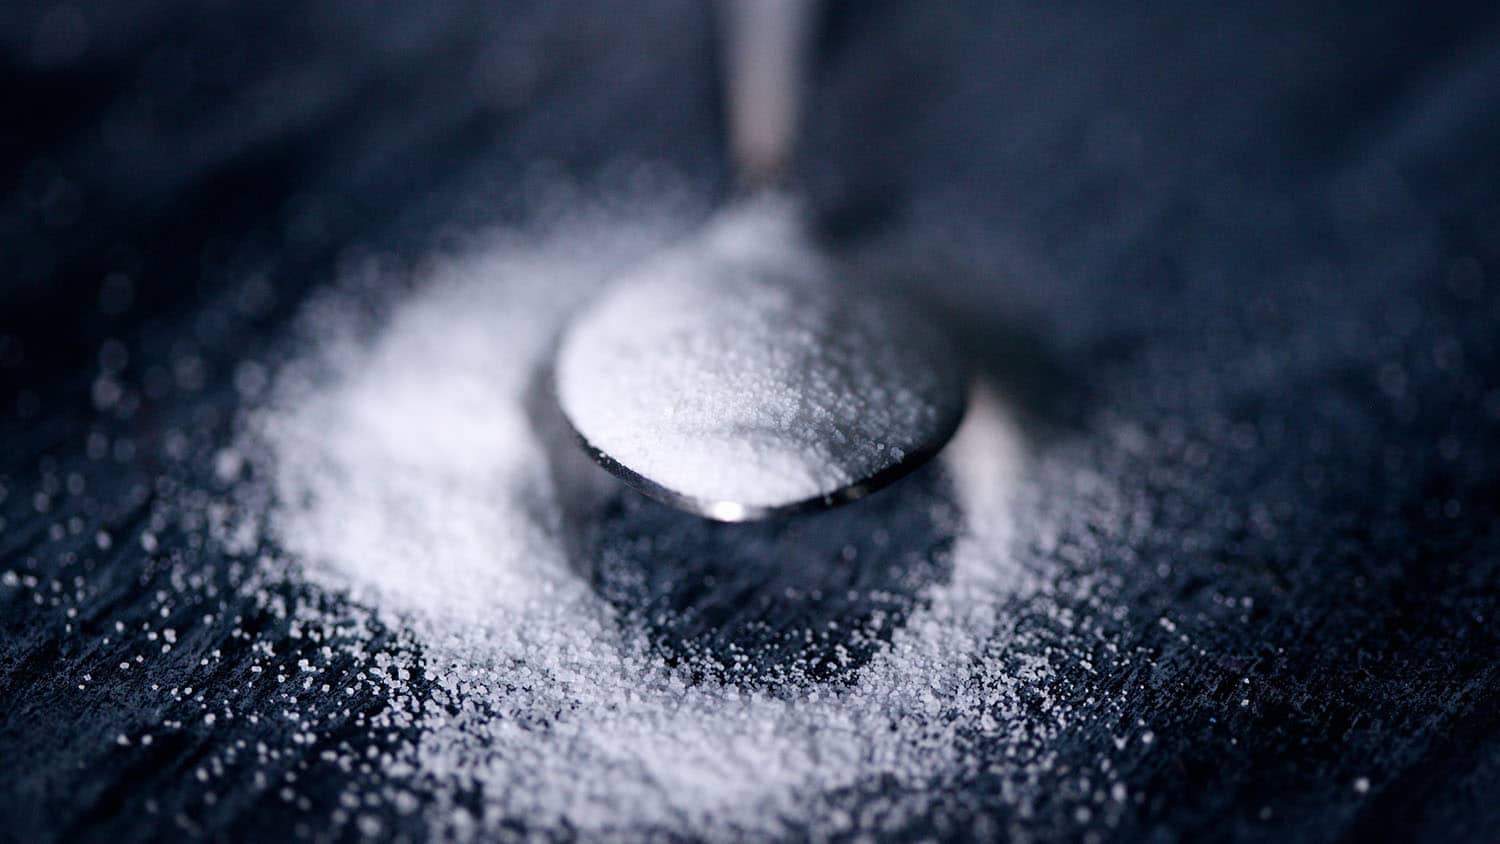 a spoon holds a scoop of white powder over a grey table